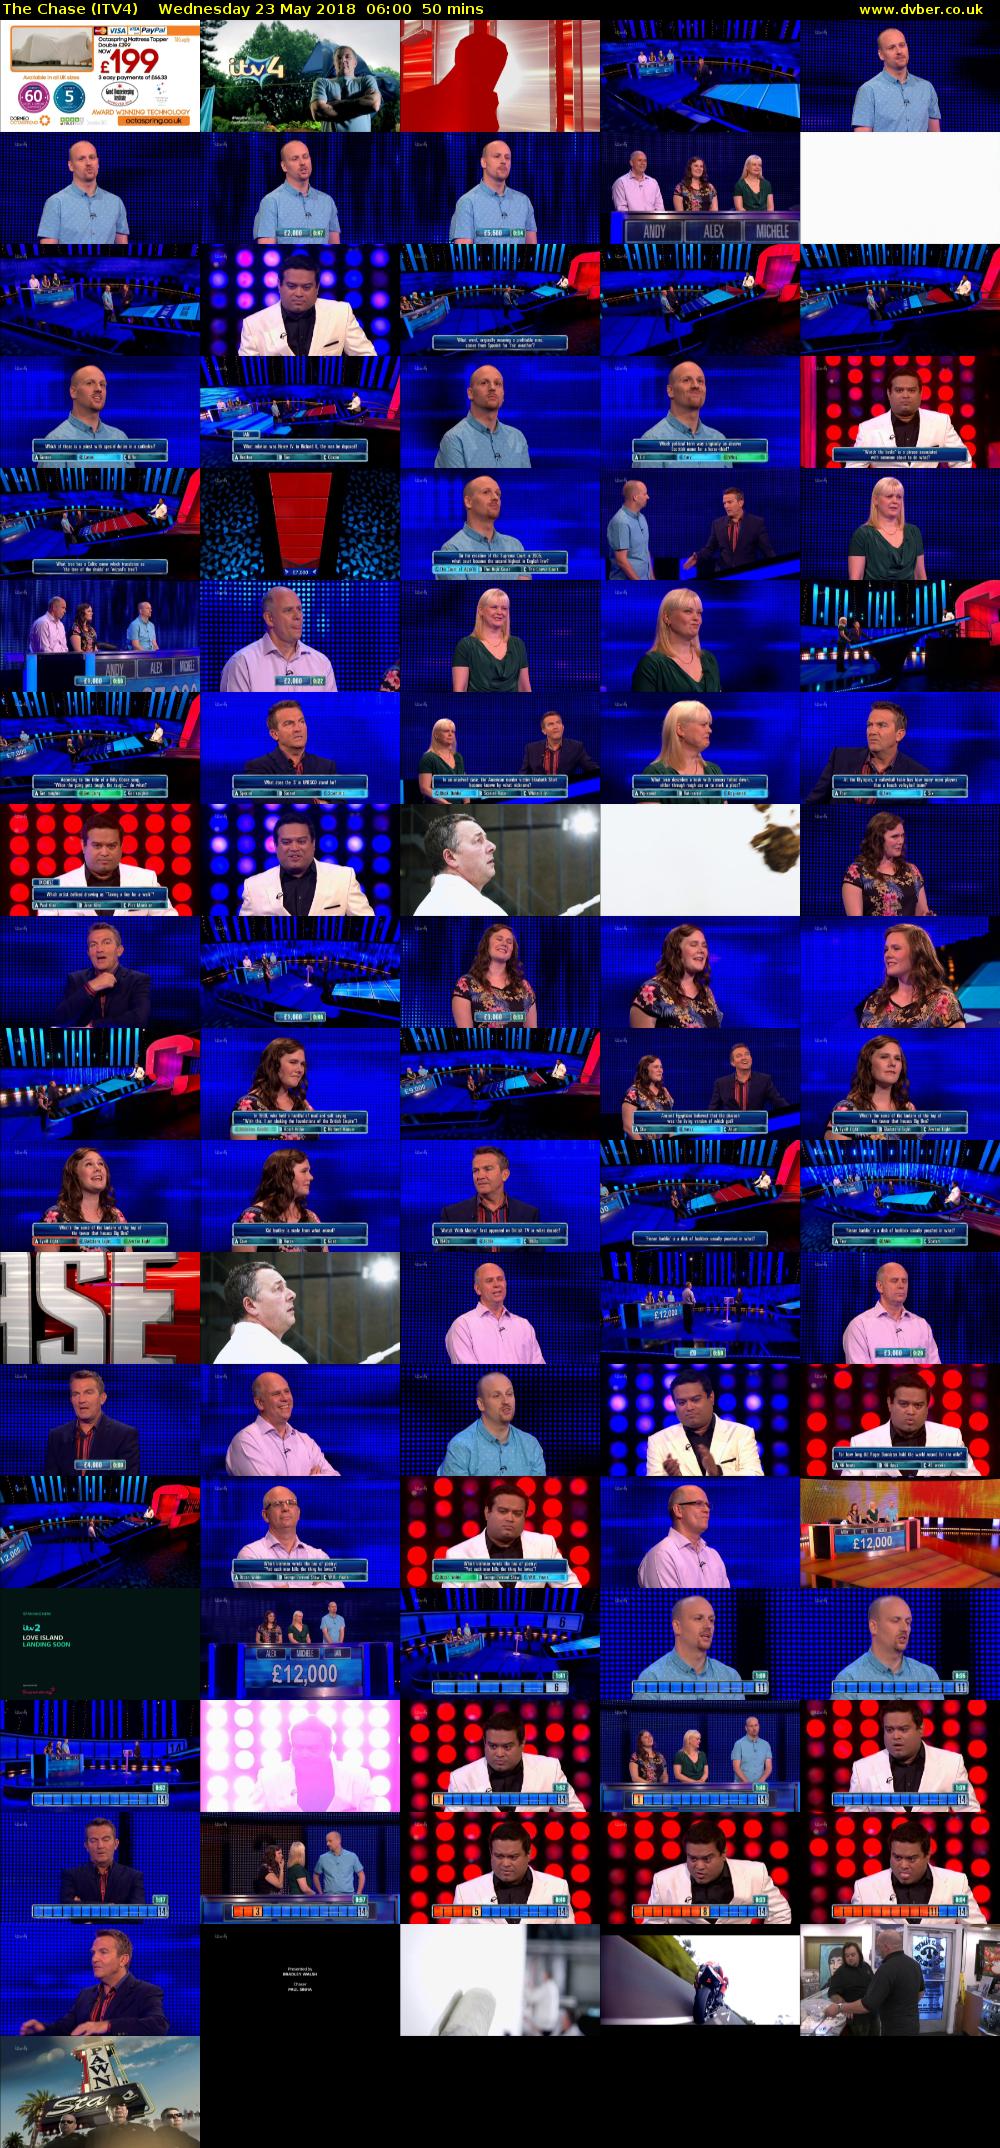 The Chase (ITV4) Wednesday 23 May 2018 06:00 - 06:50